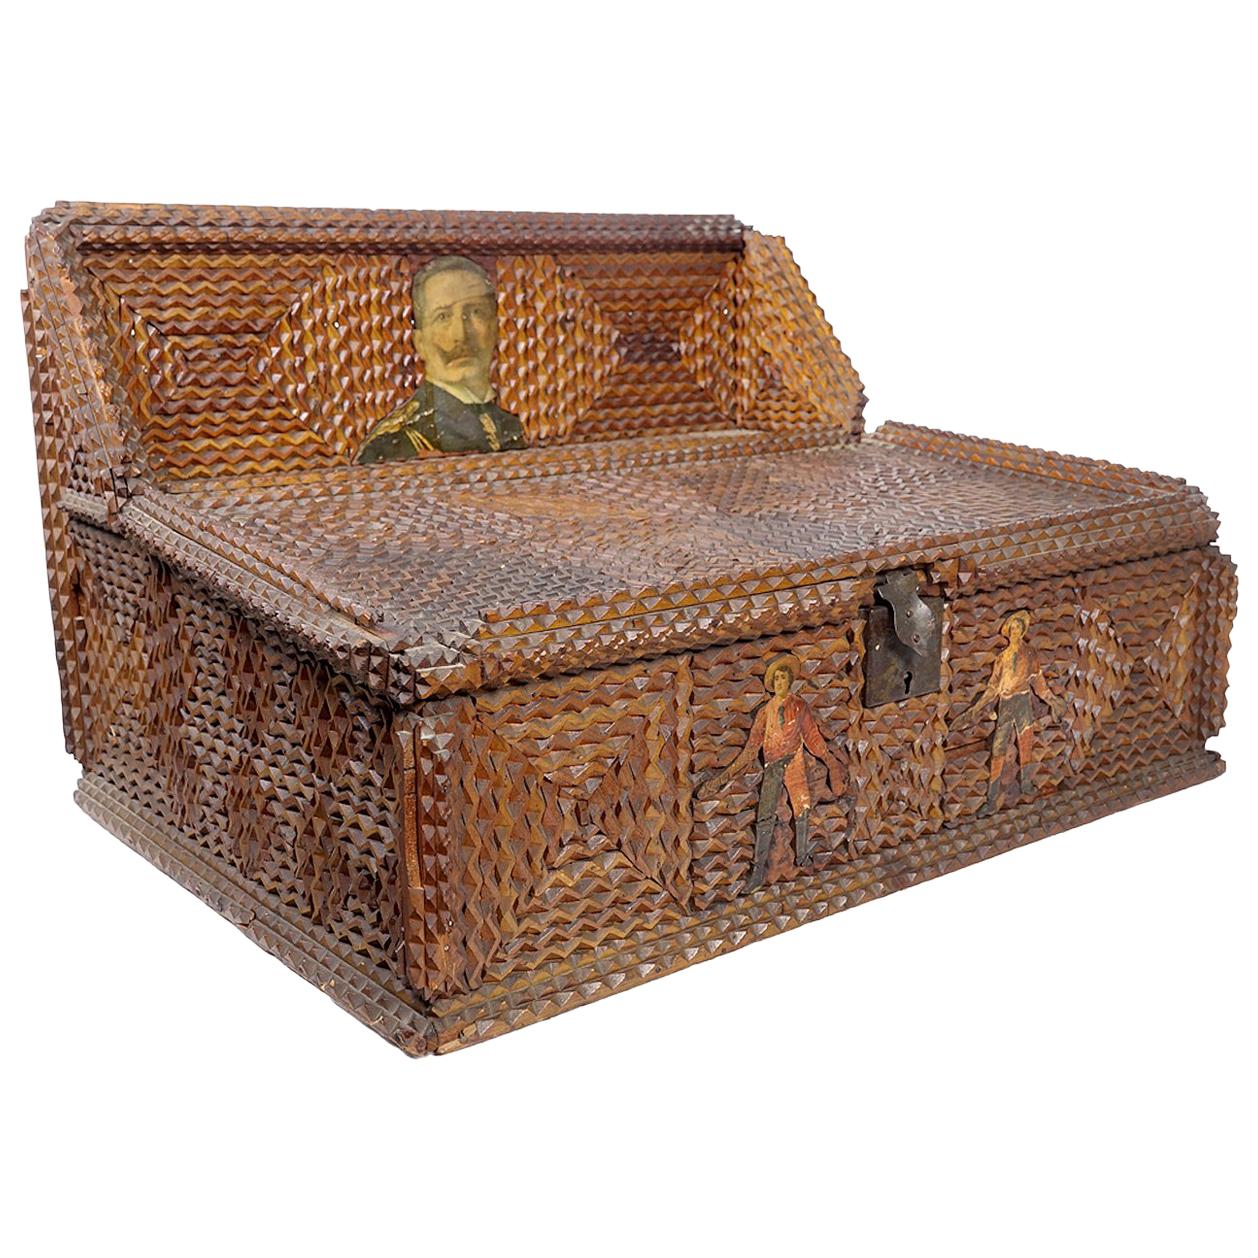 LATE-19TH-CENTURY tramp art box embellished with decoupage